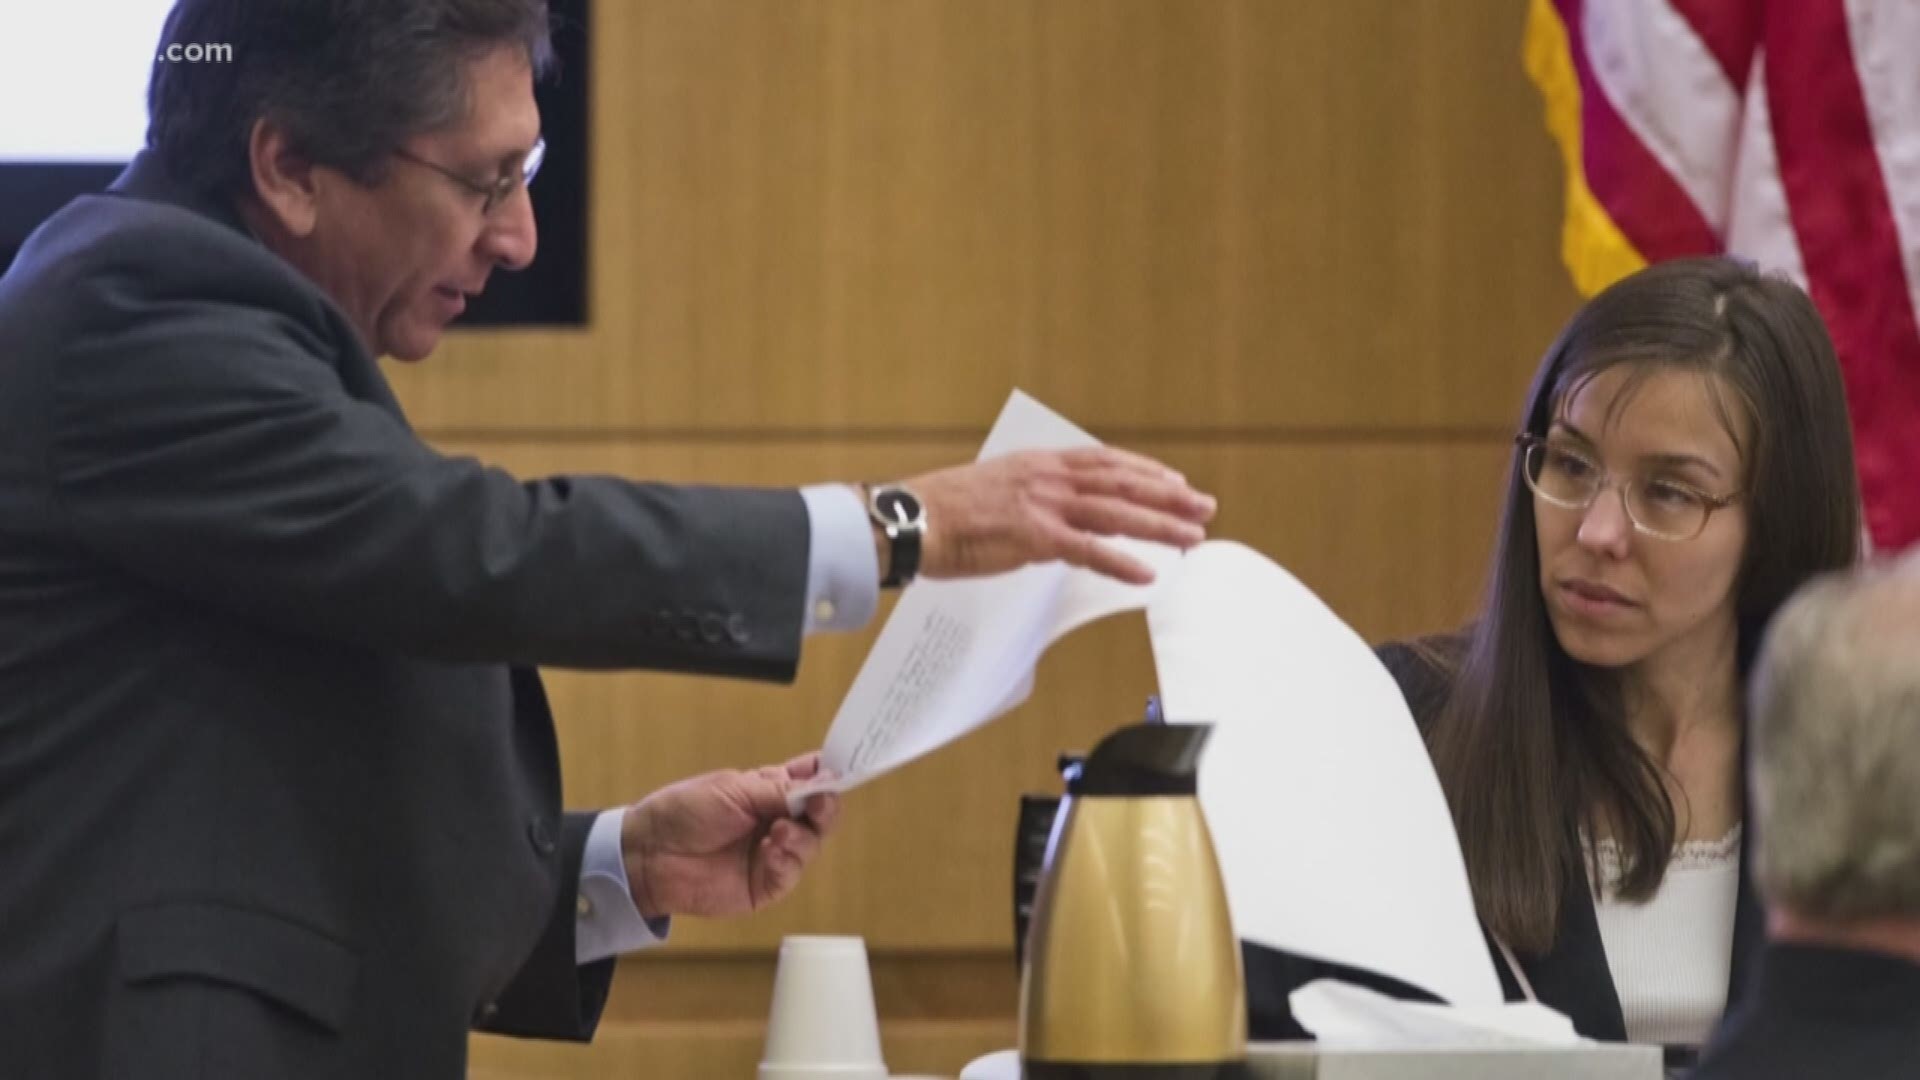 Jodi Arias prosecutor, Juan Martinez, is being punished by Maricopa County Attorney Bill Montgomery, but Montgomery won't say why. Montgomery will say it is related to a ethics investigation into Martinez.